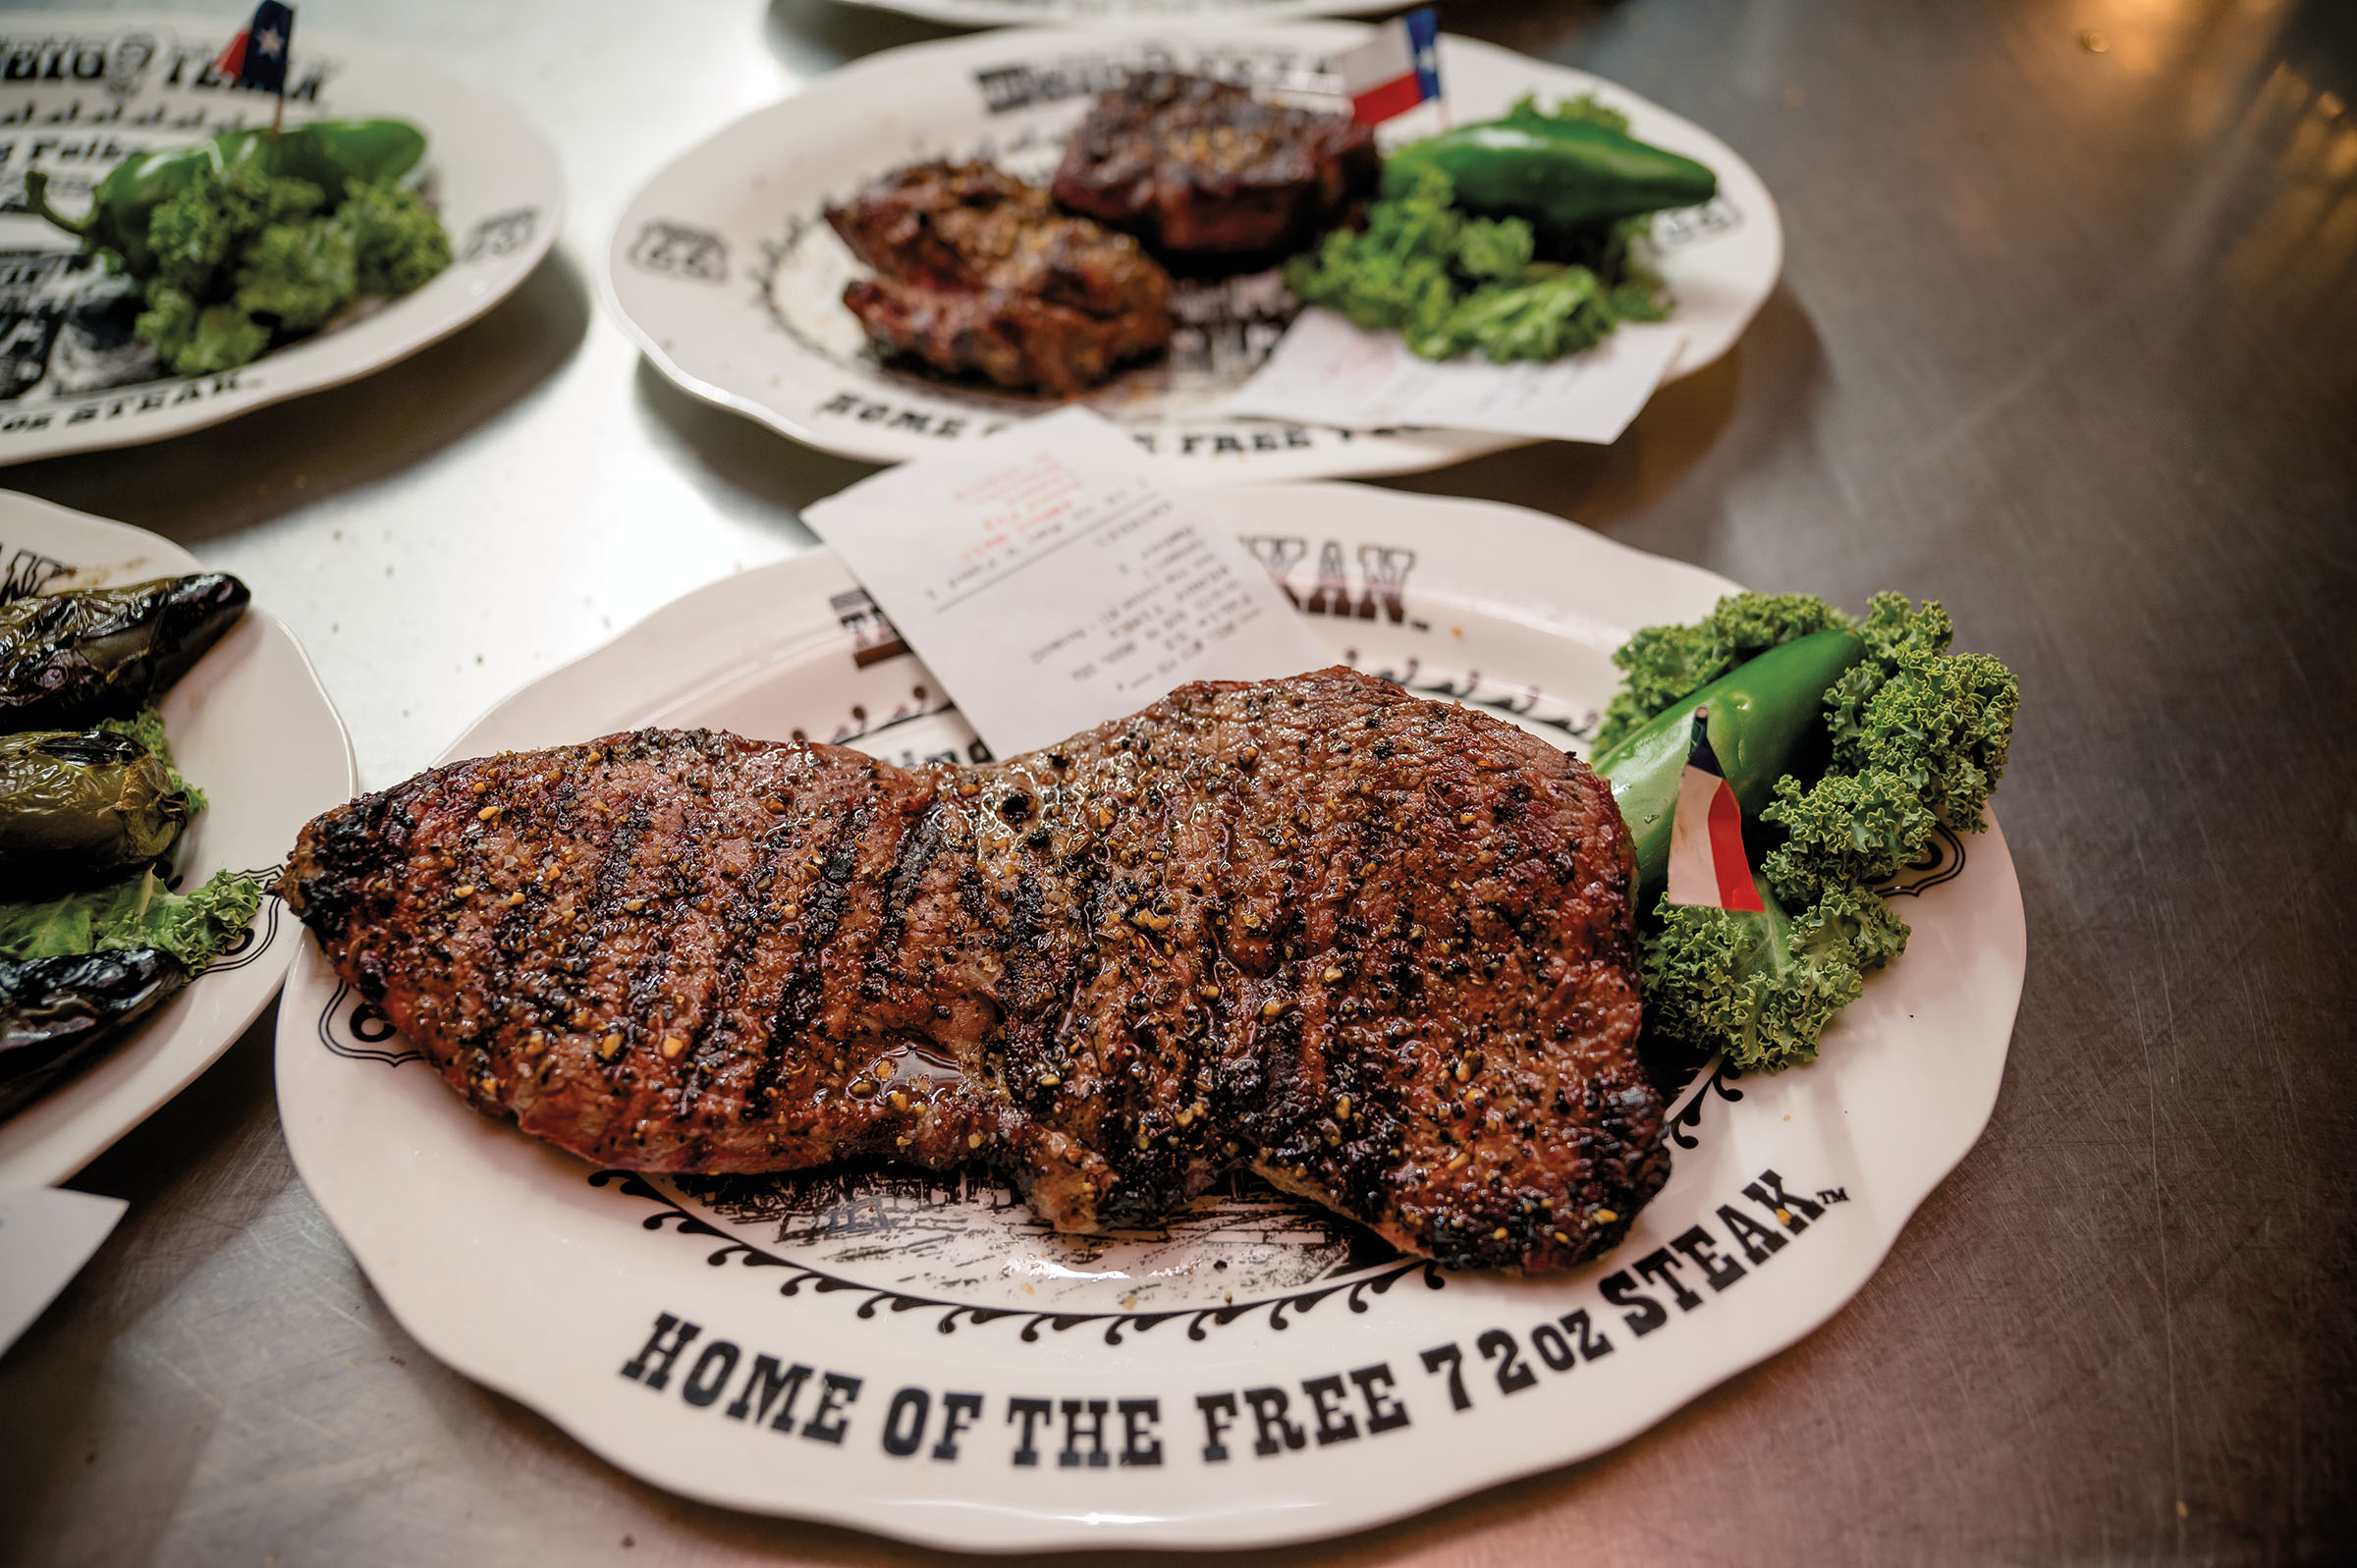 A large steak with grill marks and a few pieces of broccoli sits on a white plate reading "Home of the free 72oz steak"